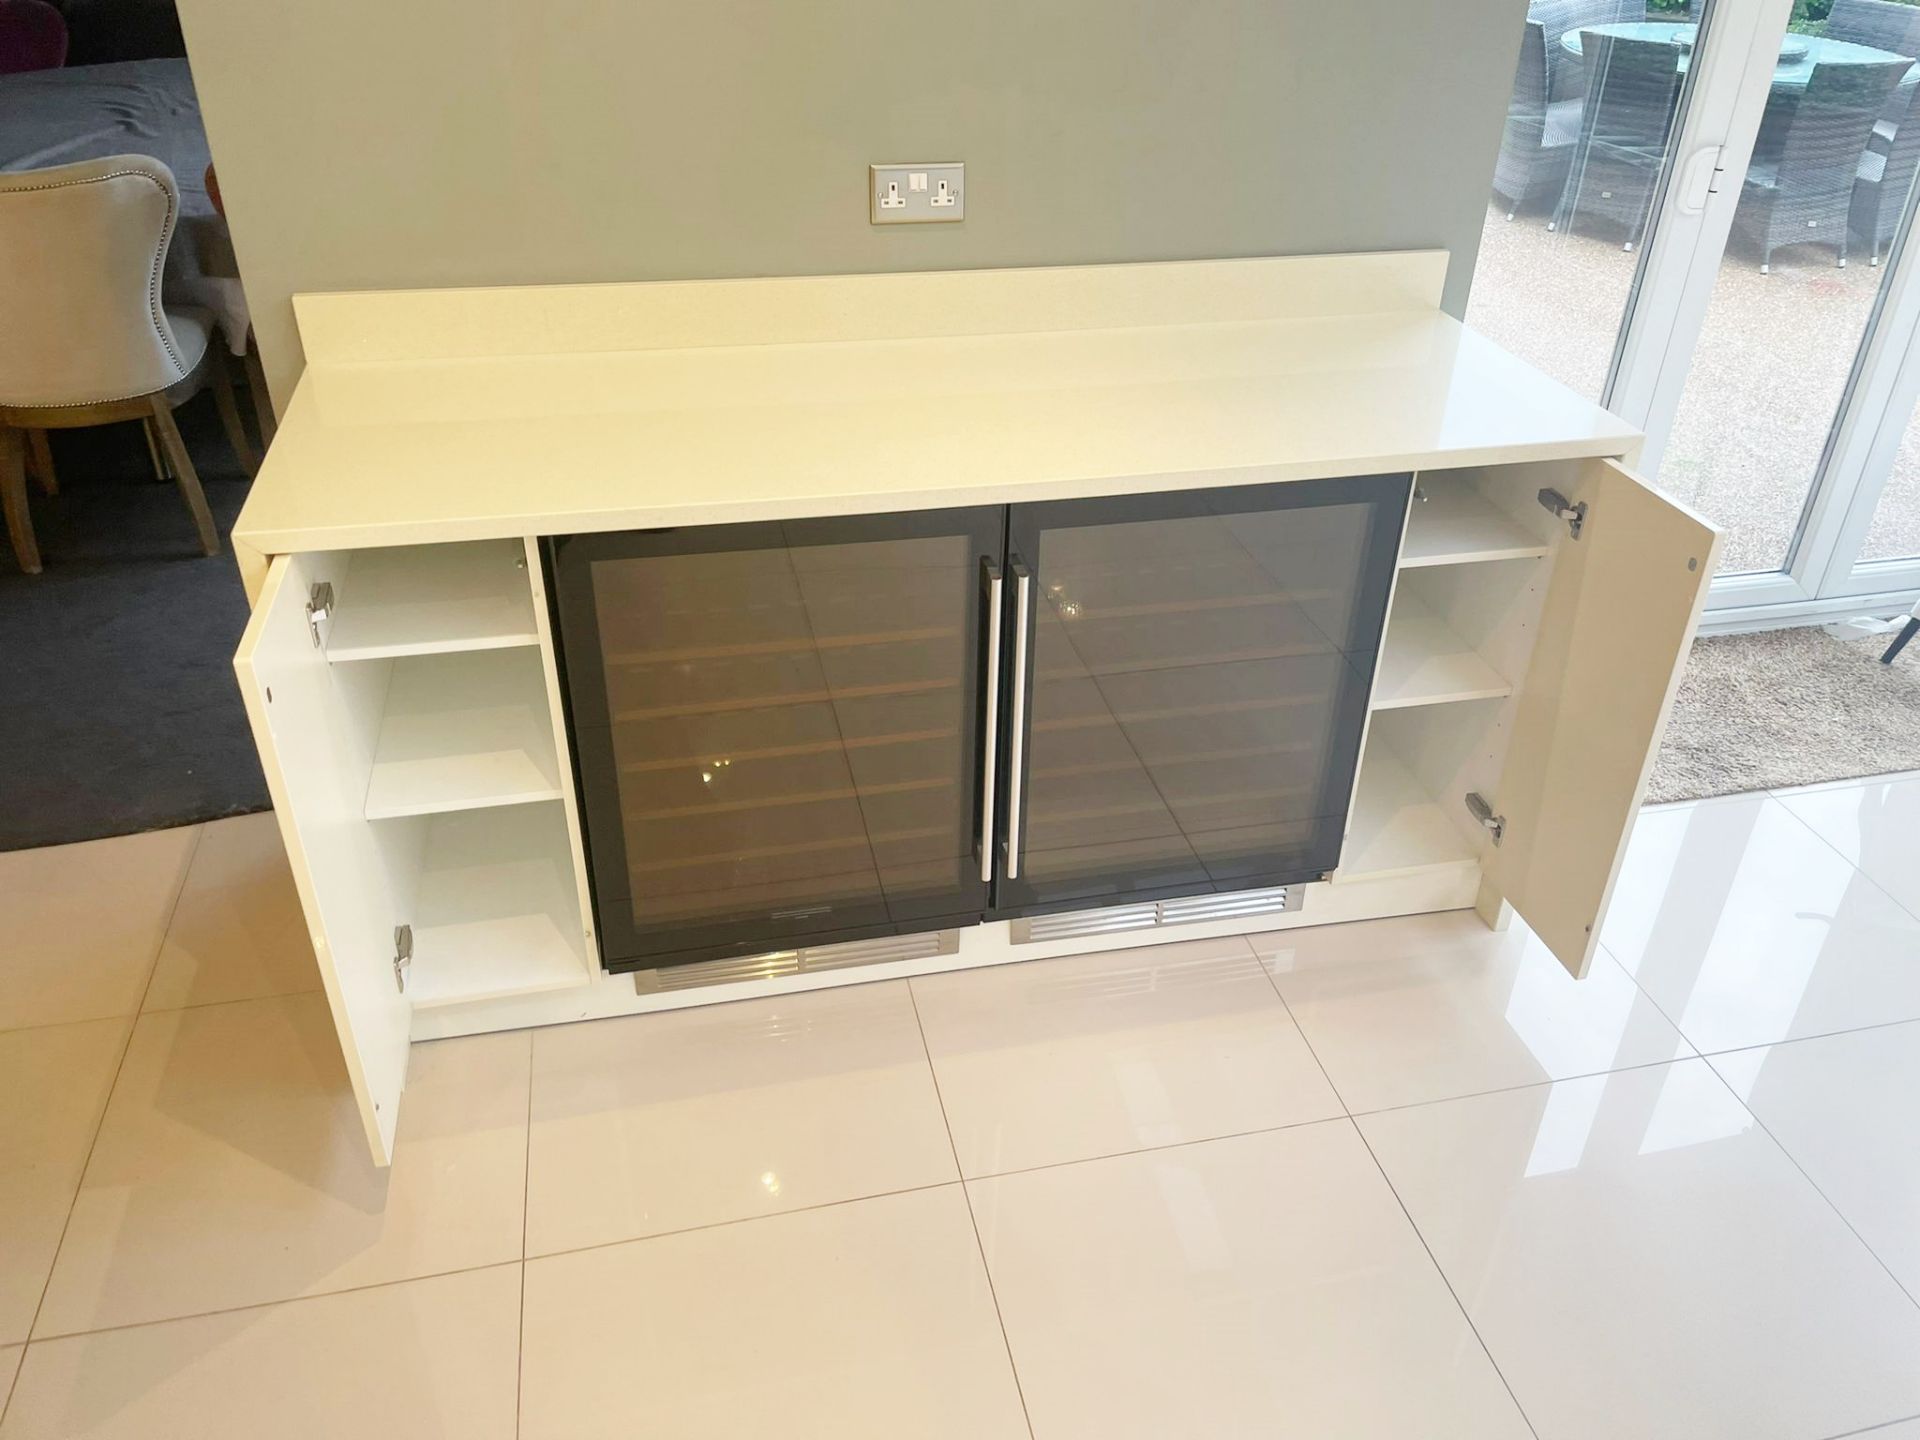 1 x Contemporary ALNO Fitted Kitchen With Branded  Appliances Created By Award Winning Kitchen - Image 82 of 89